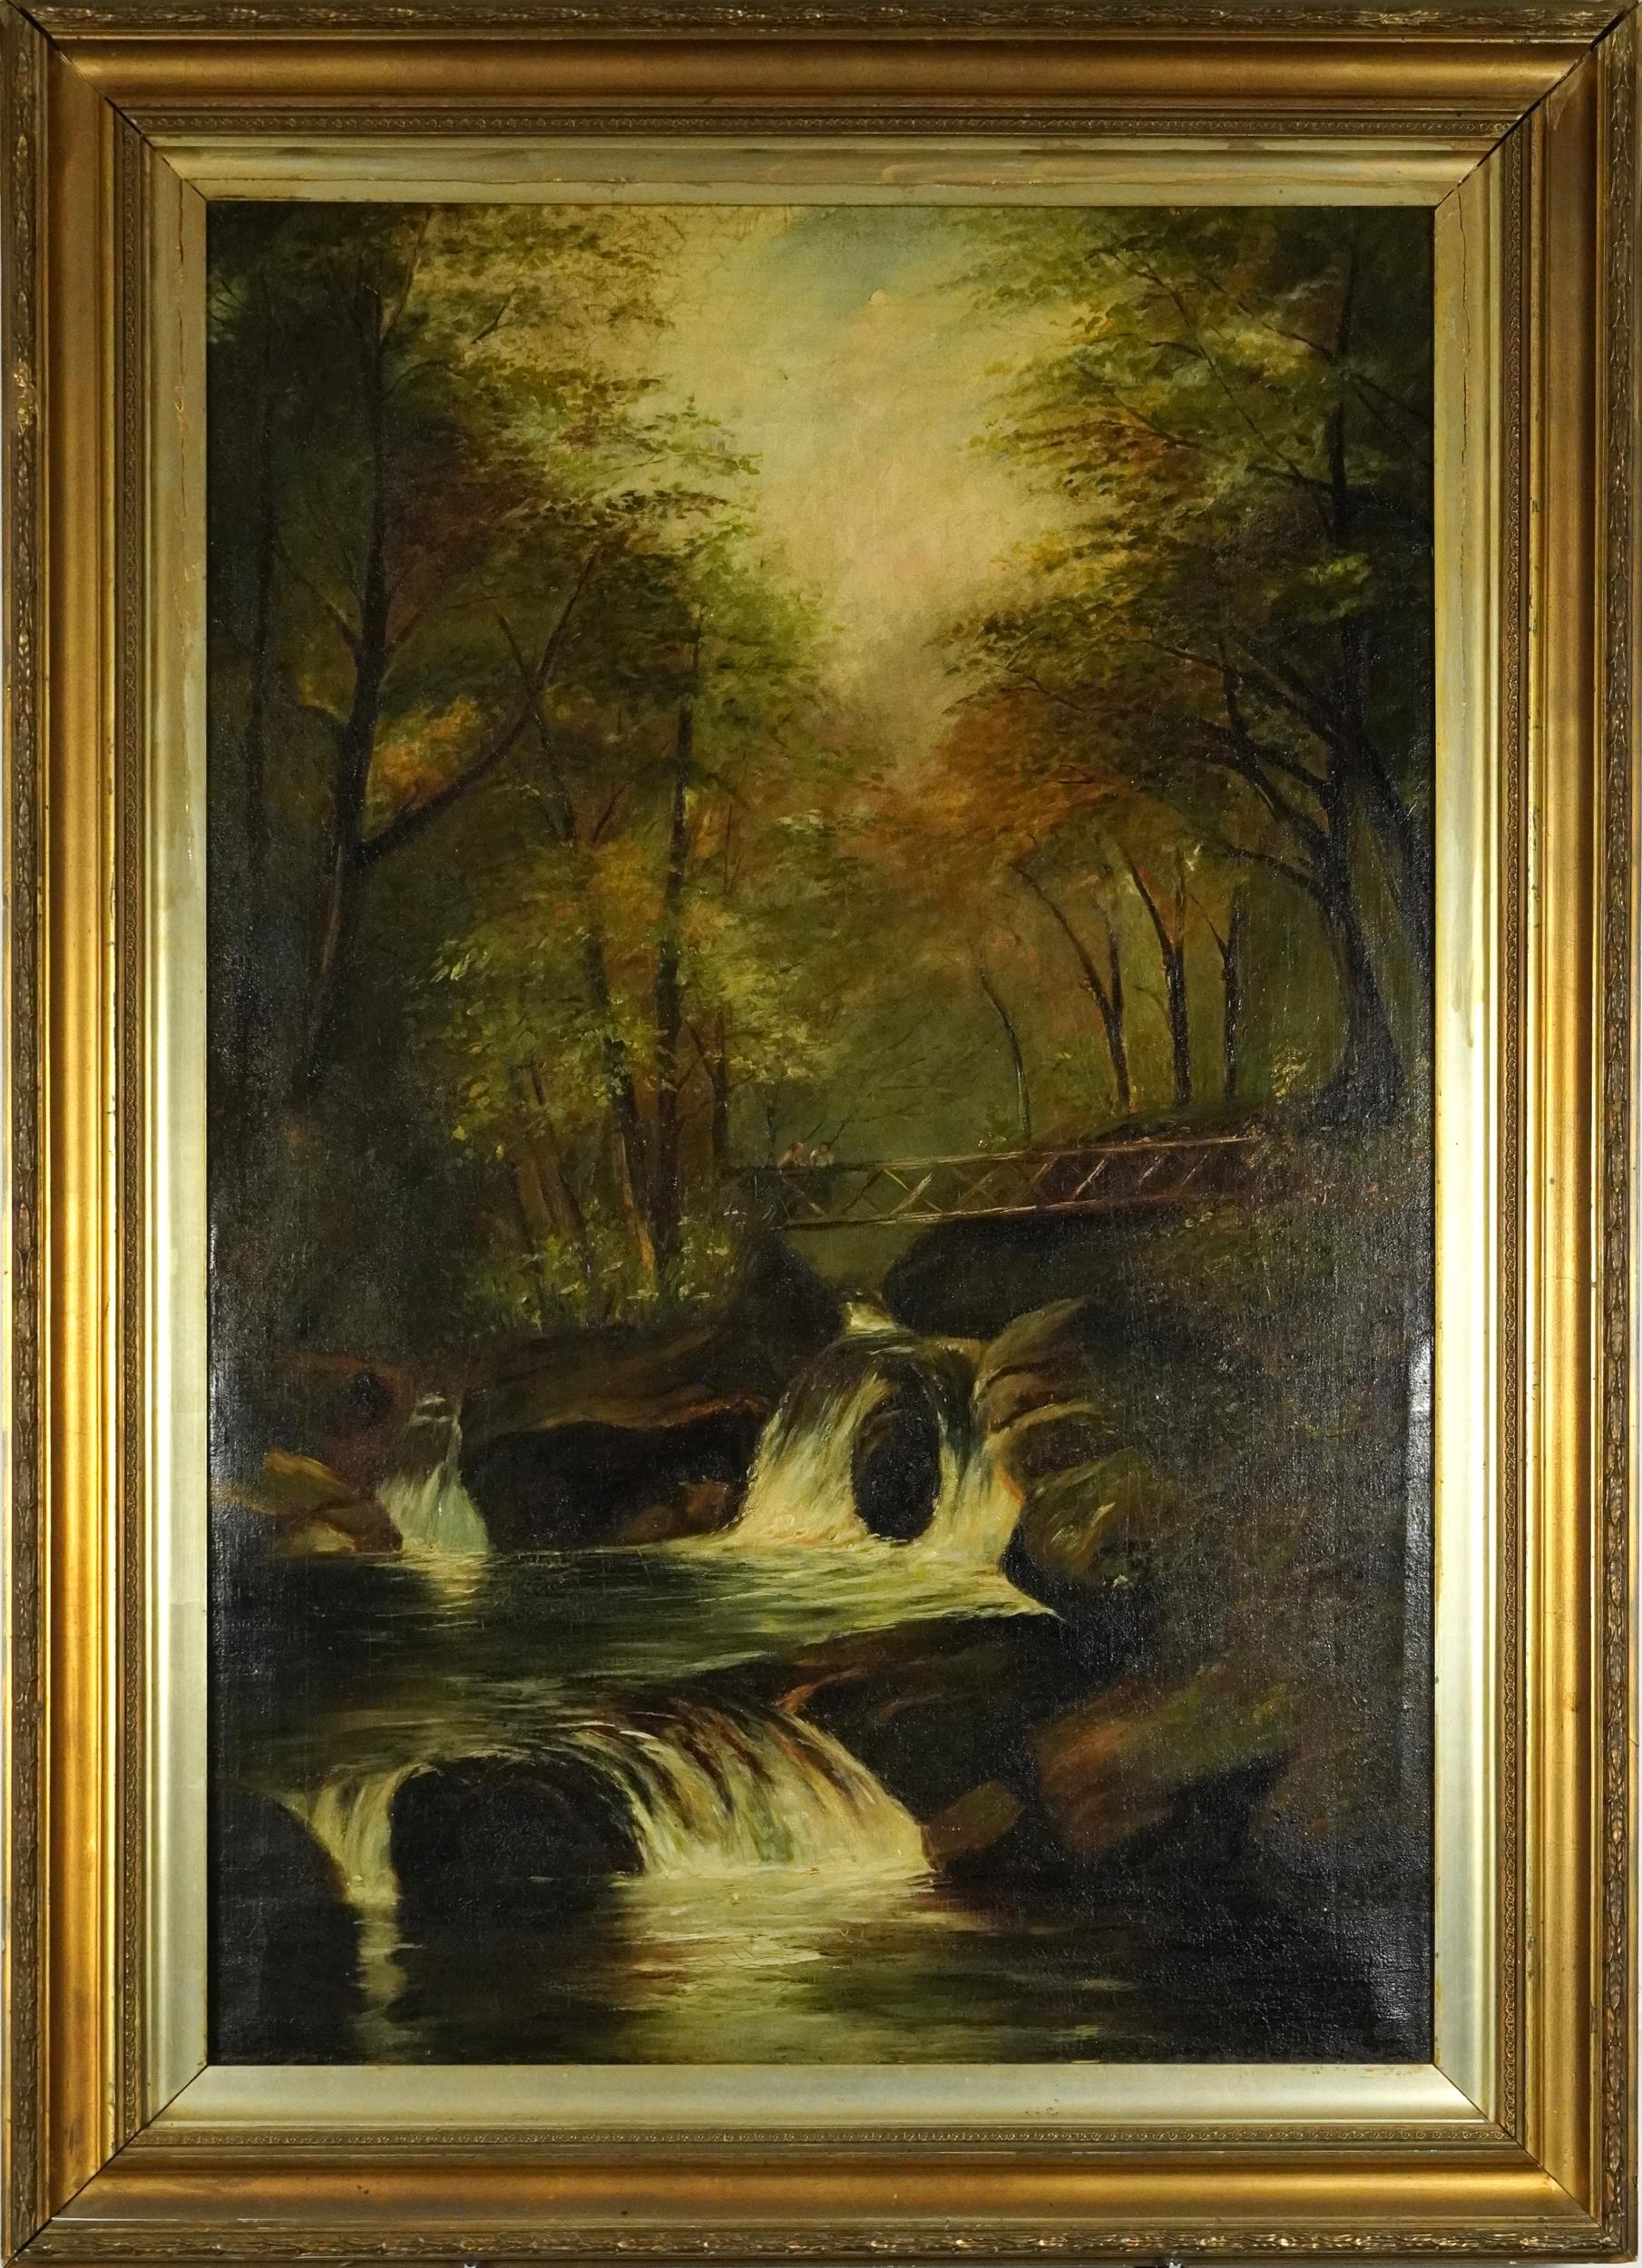 Betws-Y-Coed, figures on a bridge over waterfall, 19th century English school oil on canvas, mounted - Image 2 of 5